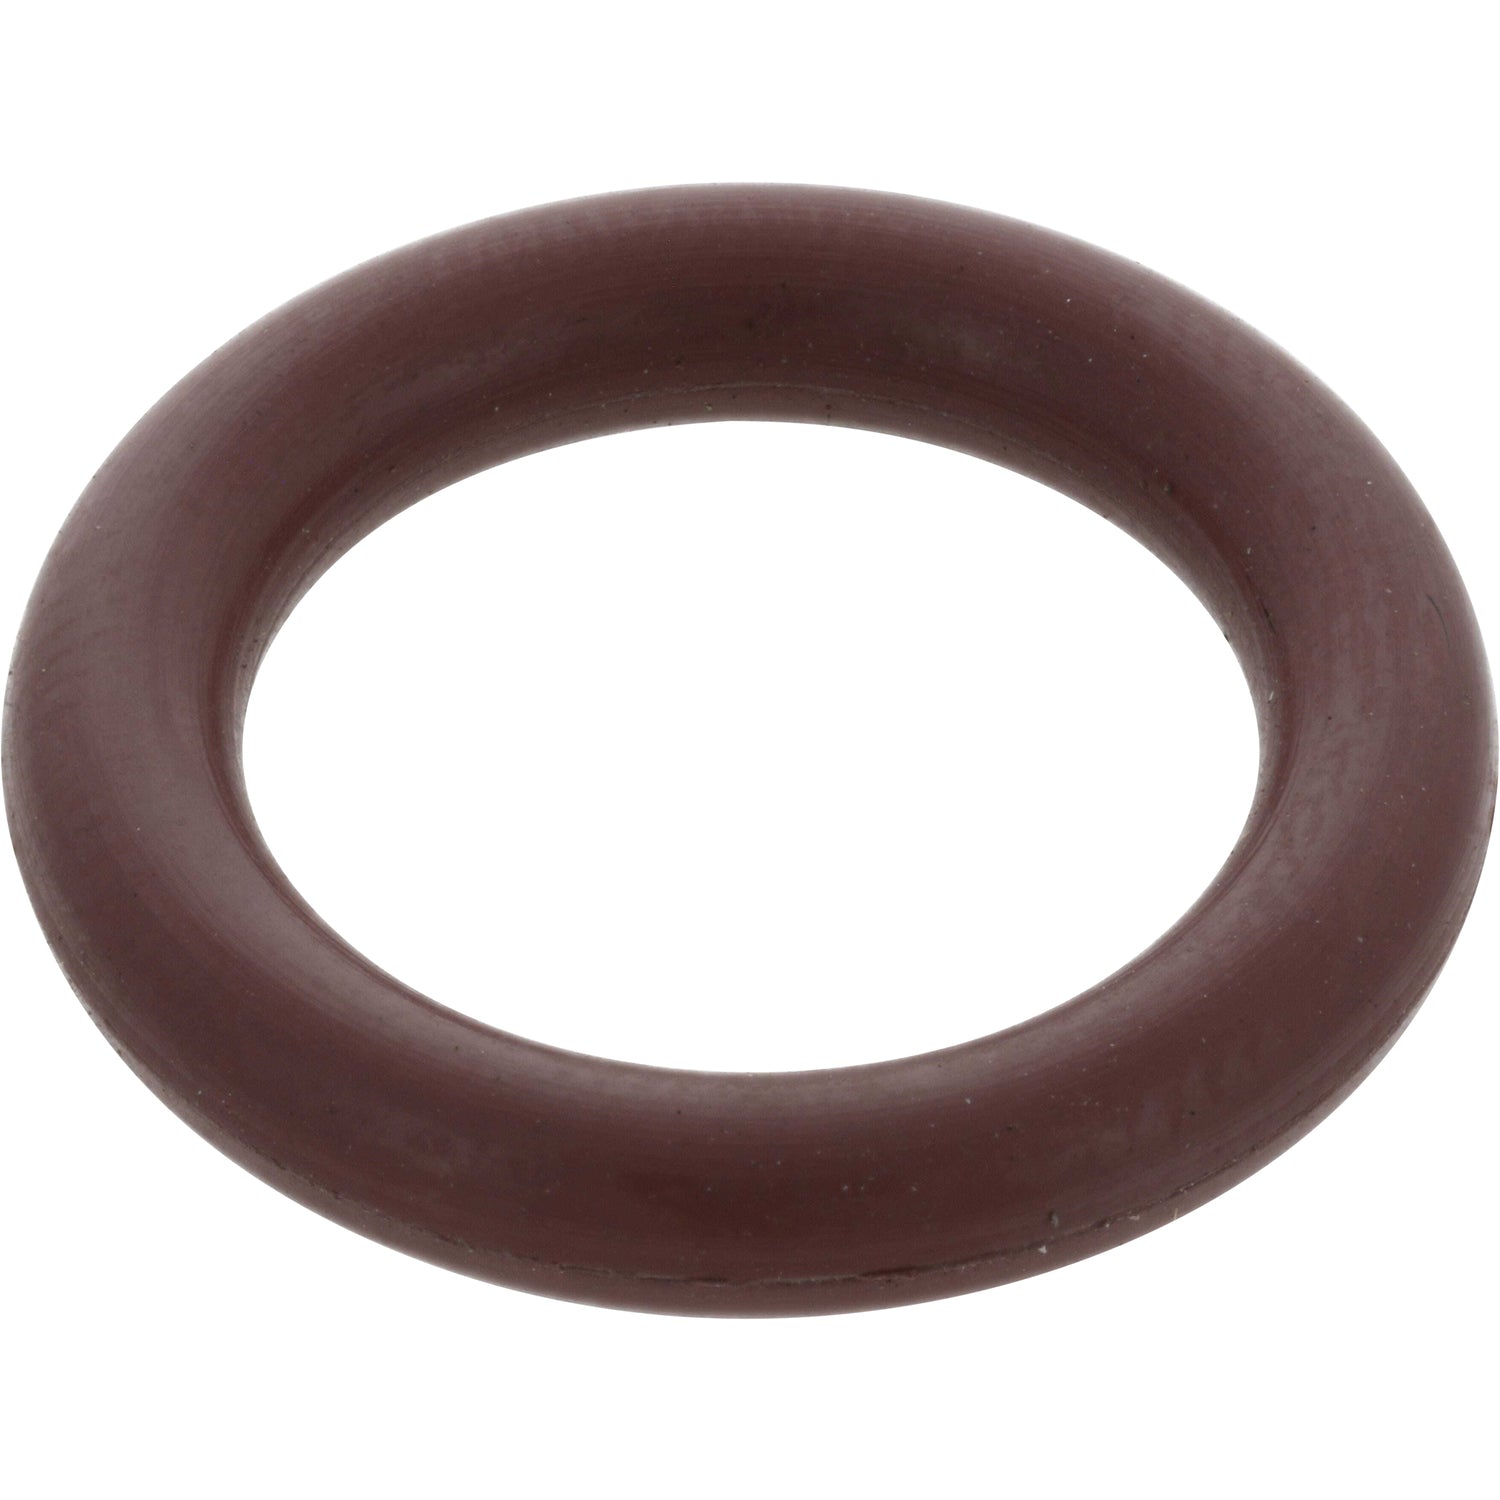  Reddish-brown rubber o-ring on a white background. HM0064